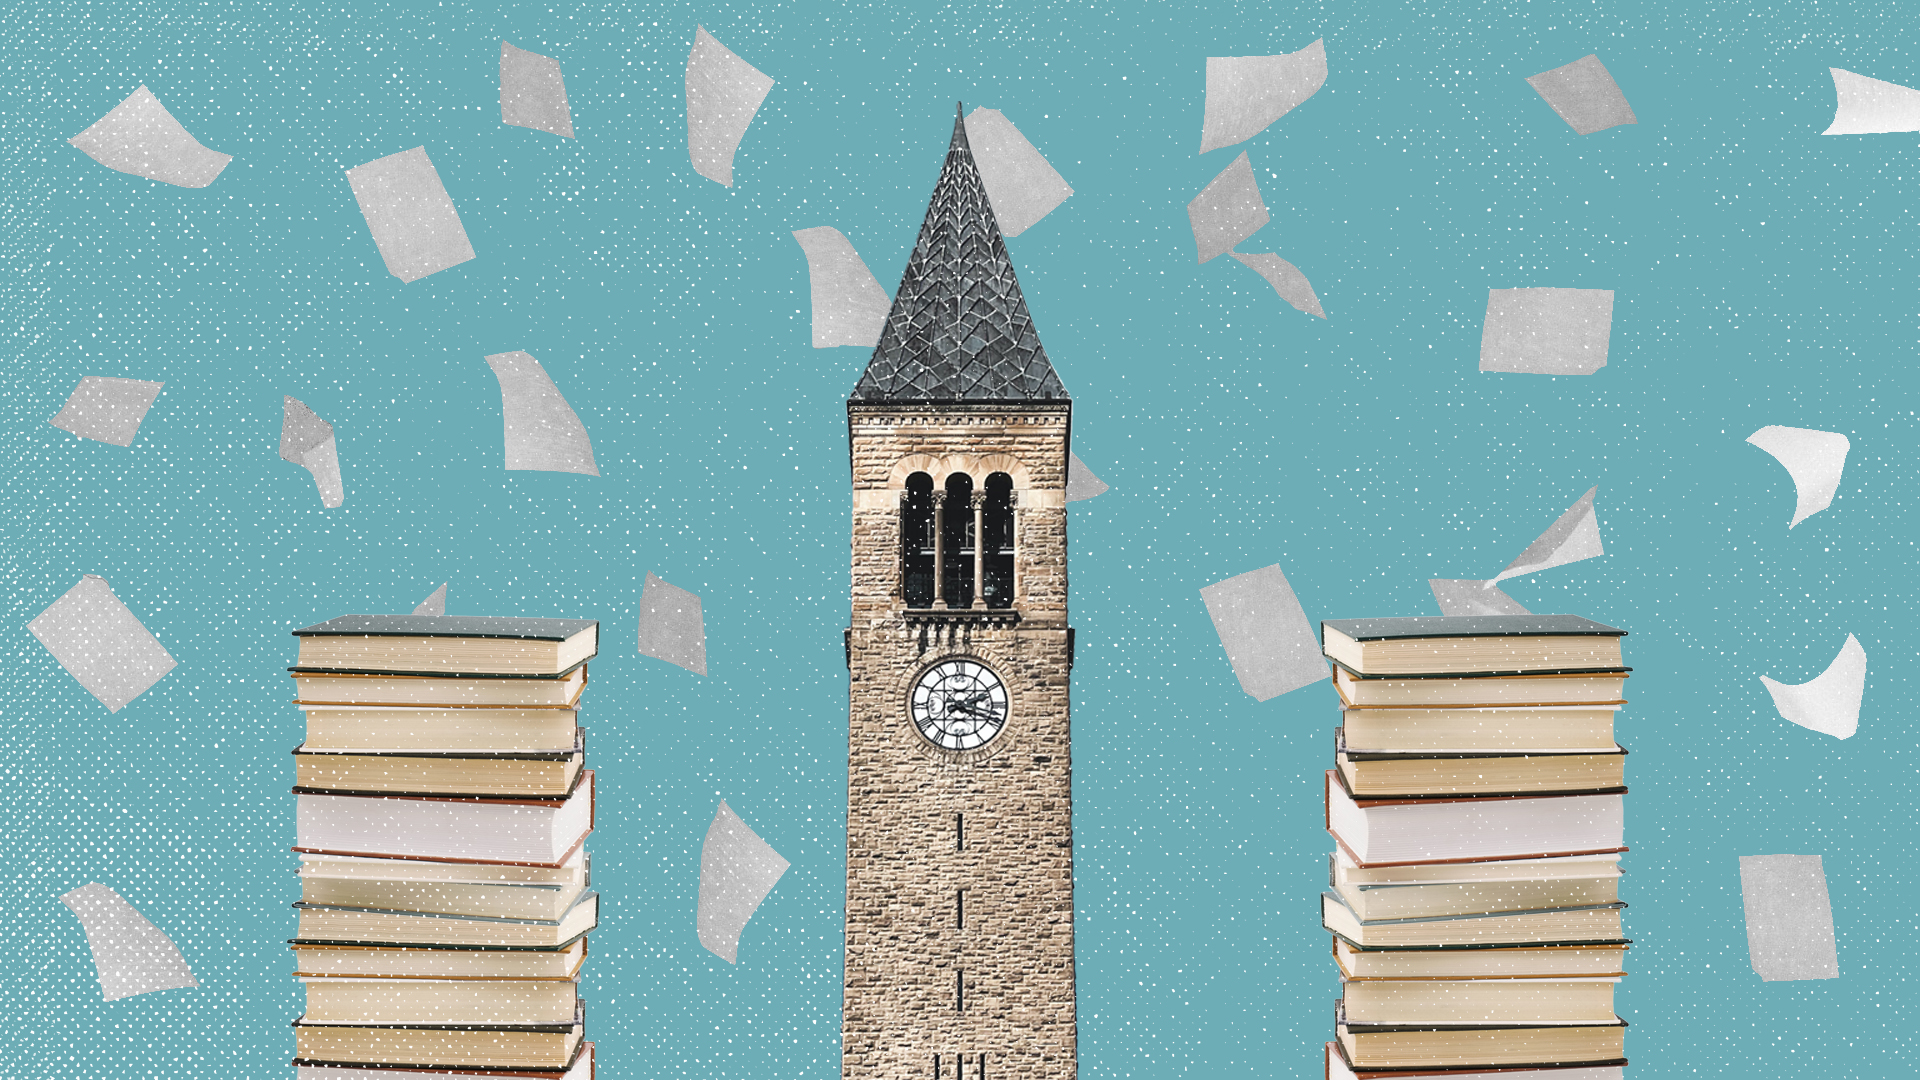 An illustration of two stacks of books with the Cornell clocktower in the middle, and pages in the air